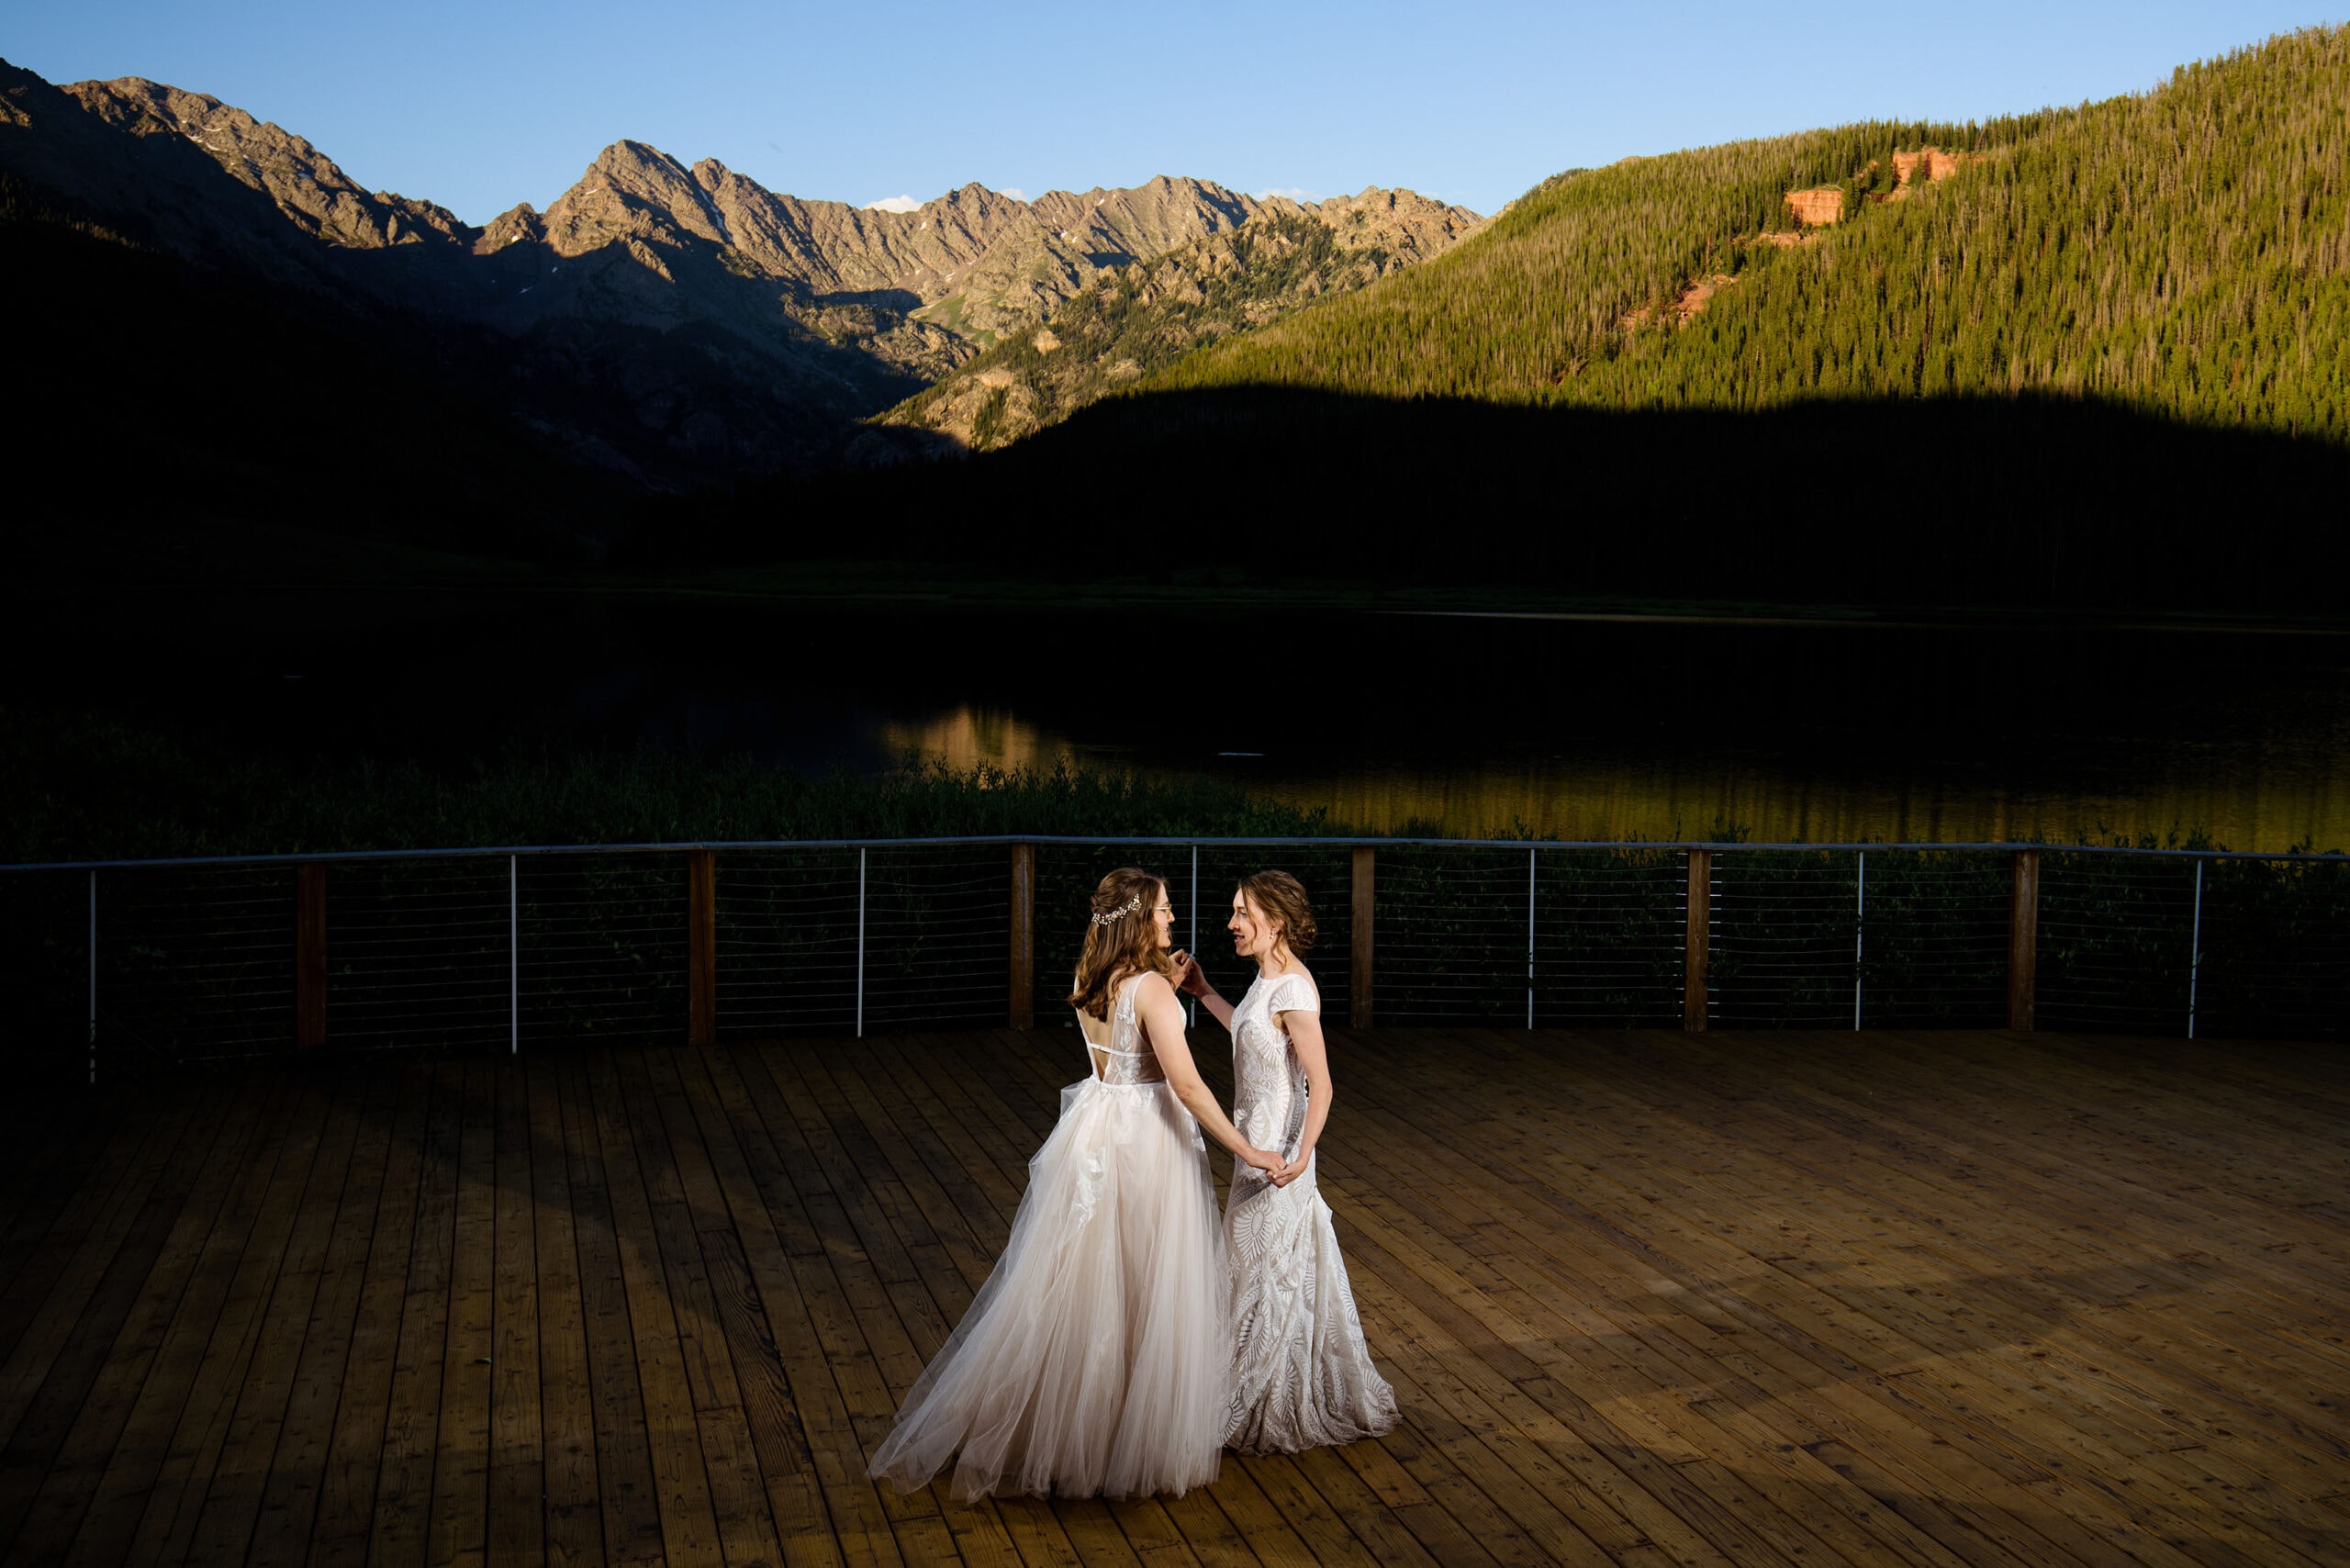 The two brides share their first dance on the dock at Piney River Ranch as the sun illuminates the Gore Range